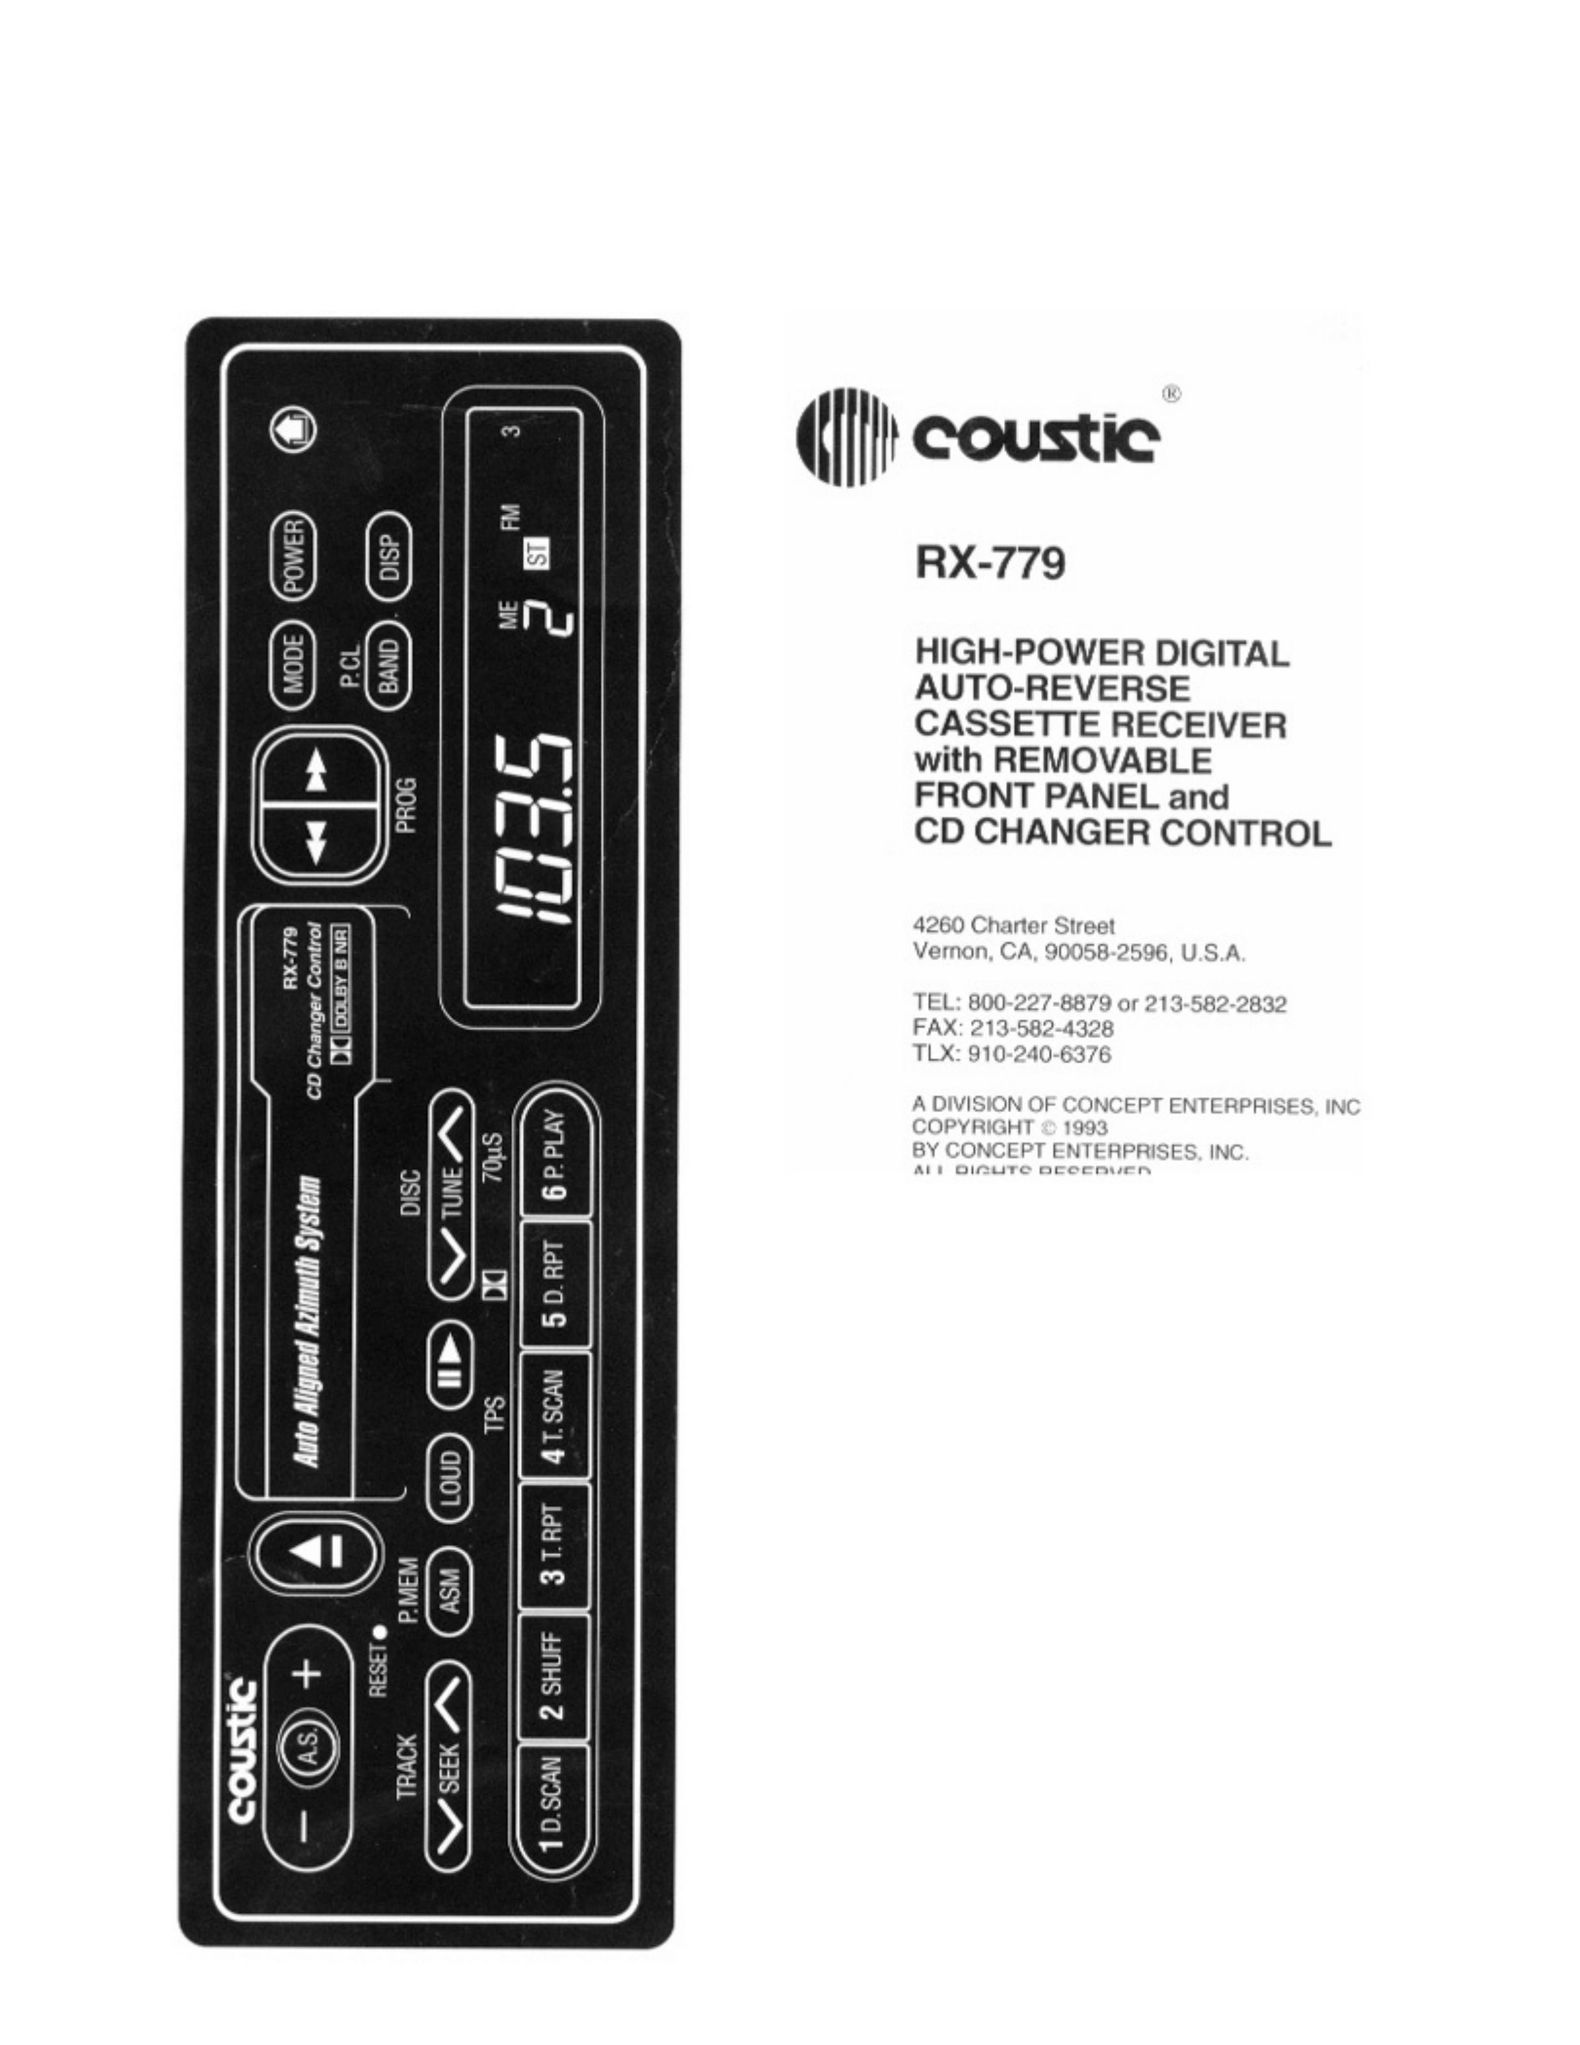 Coustic RX-779 Car Stereo System User Manual